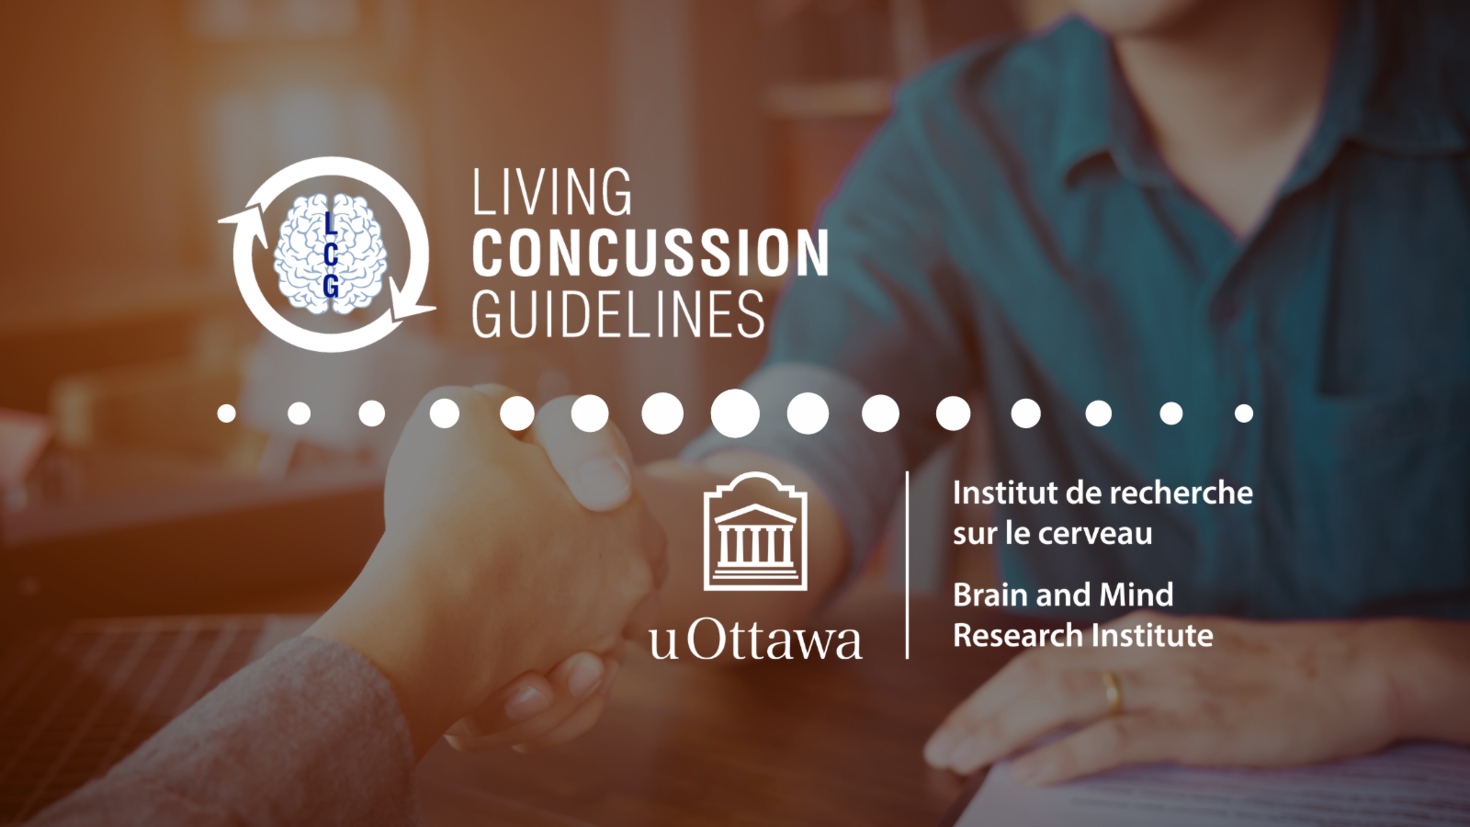 Living Concussion Guidelines logo and uOBMRI logo. Faded background of people shaking hands.